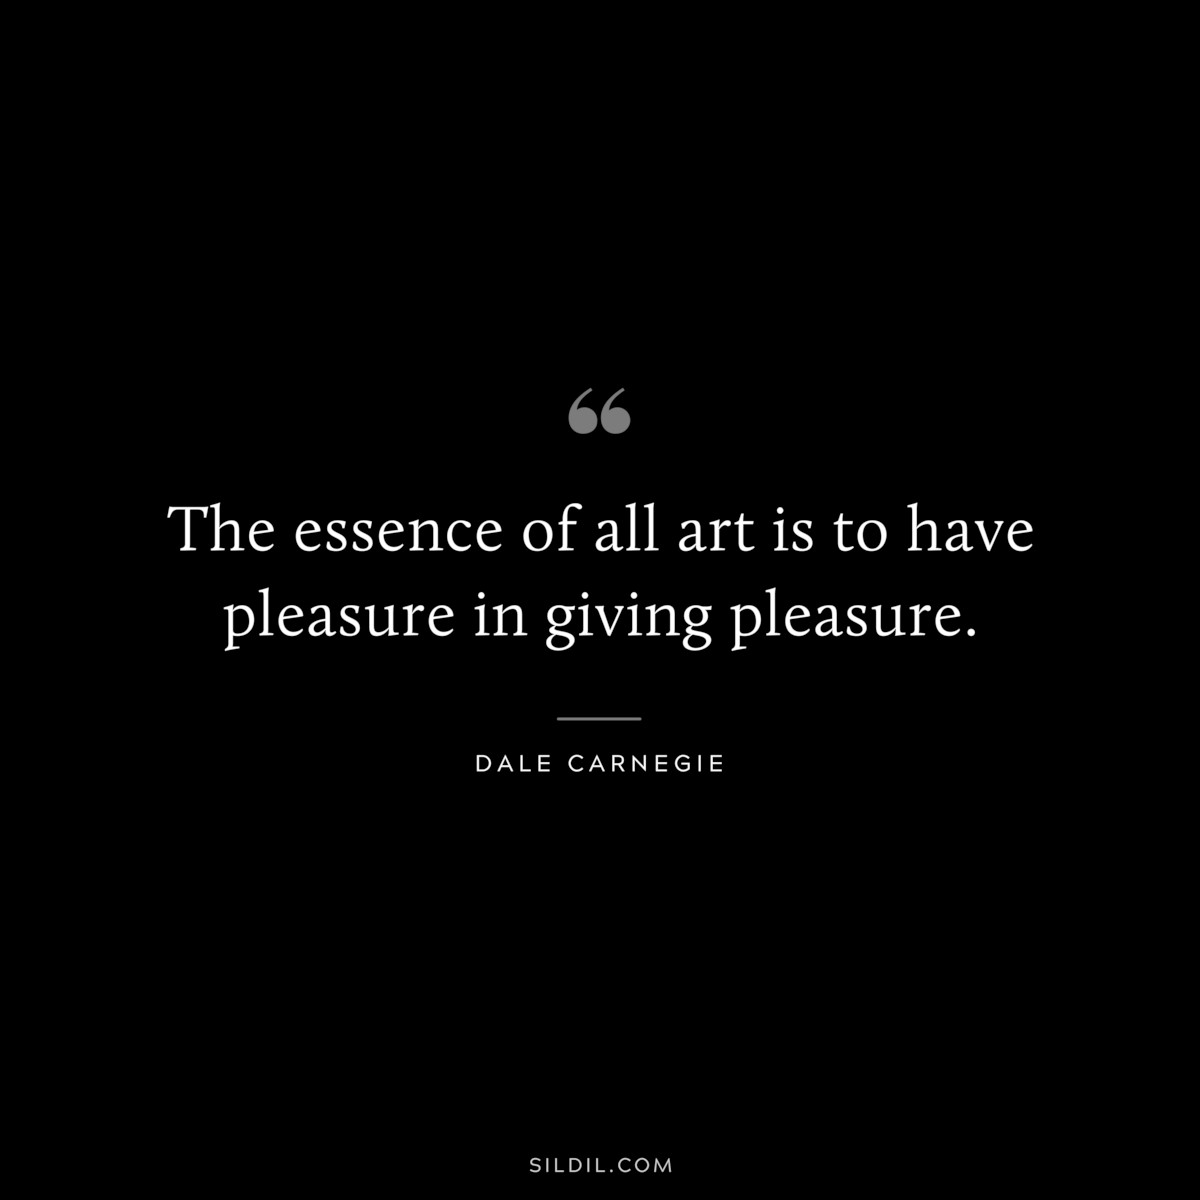 The essence of all art is to have pleasure in giving pleasure.― Dale Carnegie